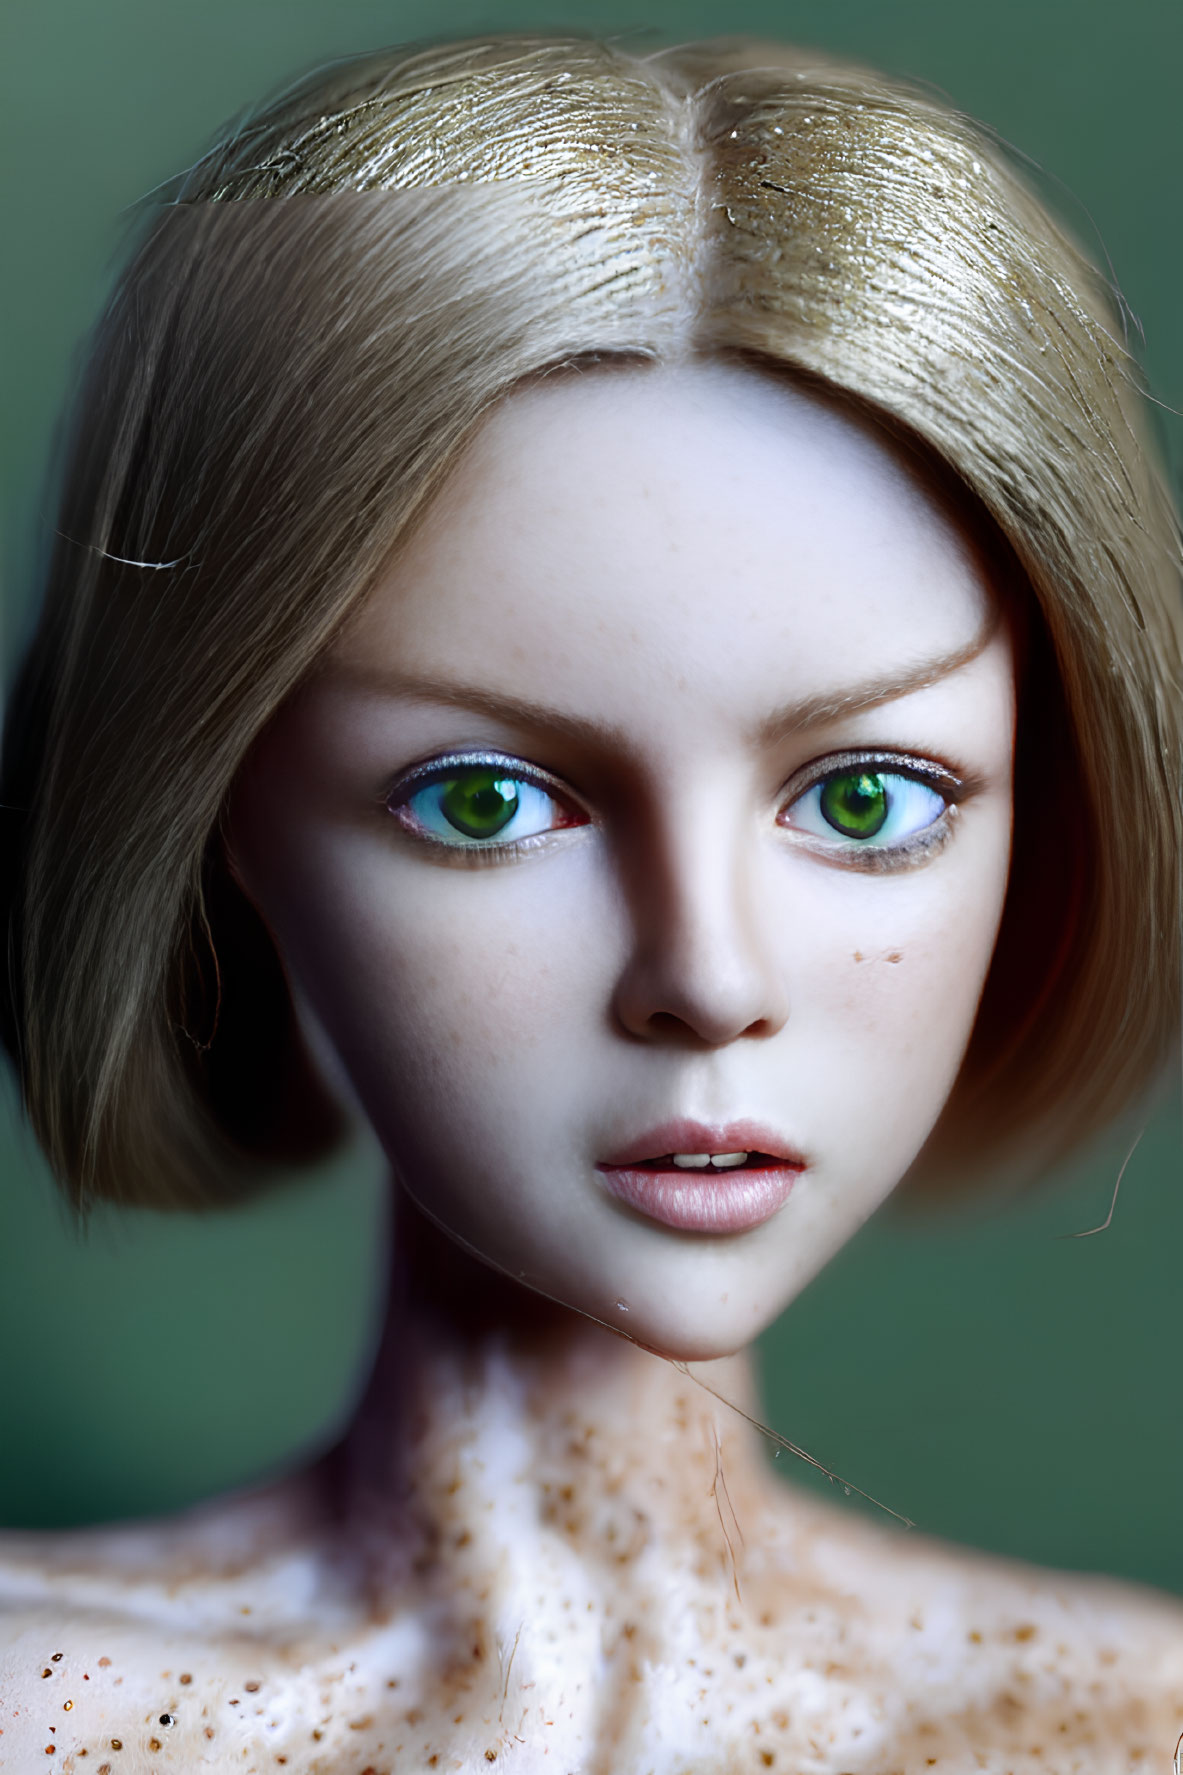 Female digital portrait: green-eyed figure with short brown hair and freckles on green background